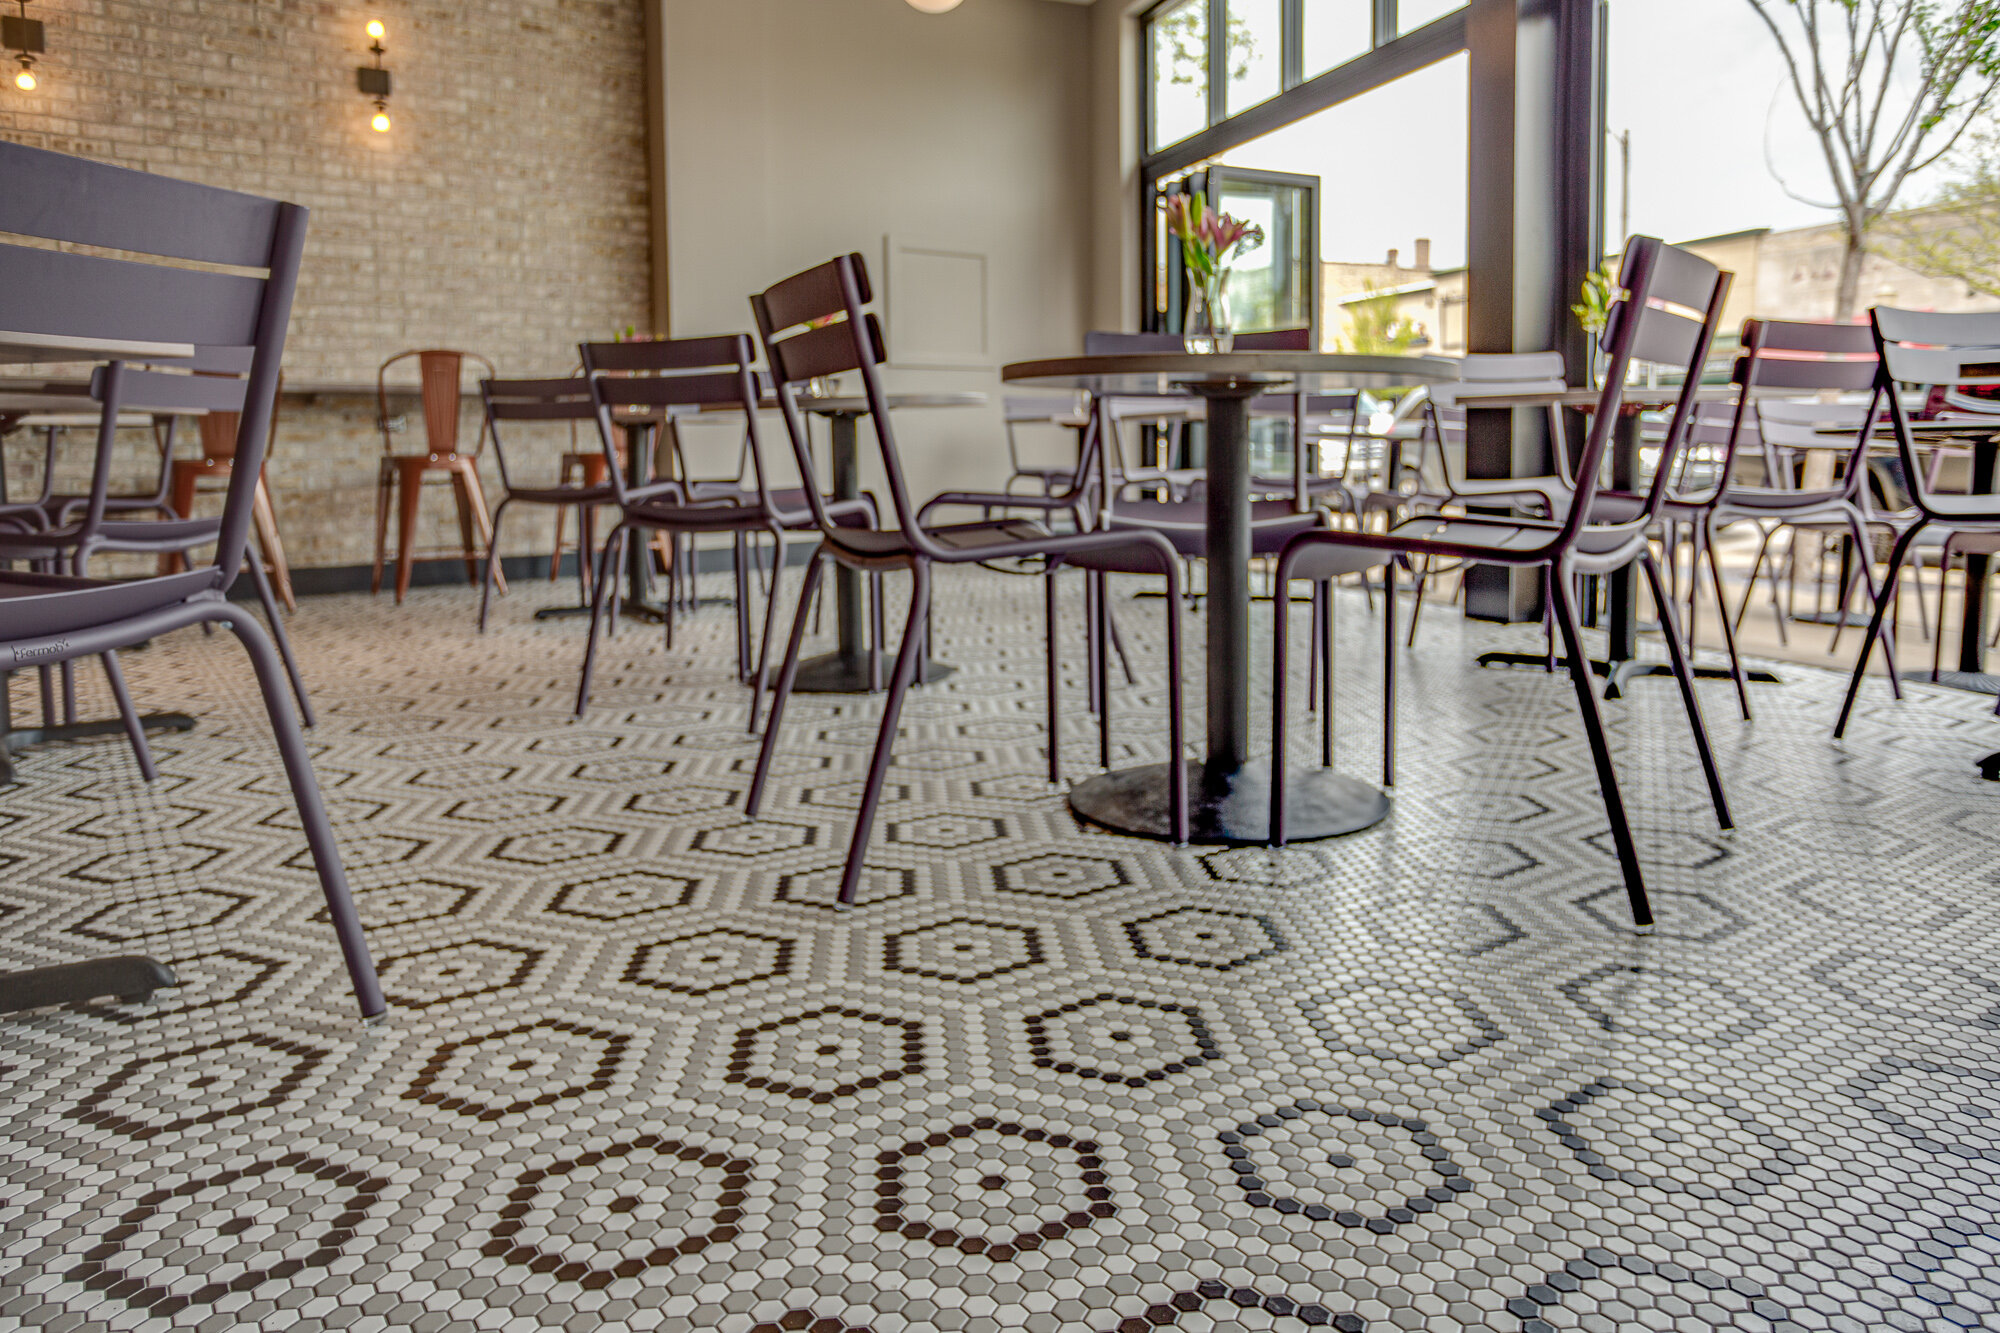 A fresh and inviting restaurant in La Grange with Ferbob furniture, a mosaic floor with hexagonal tile floor and exposed brick.